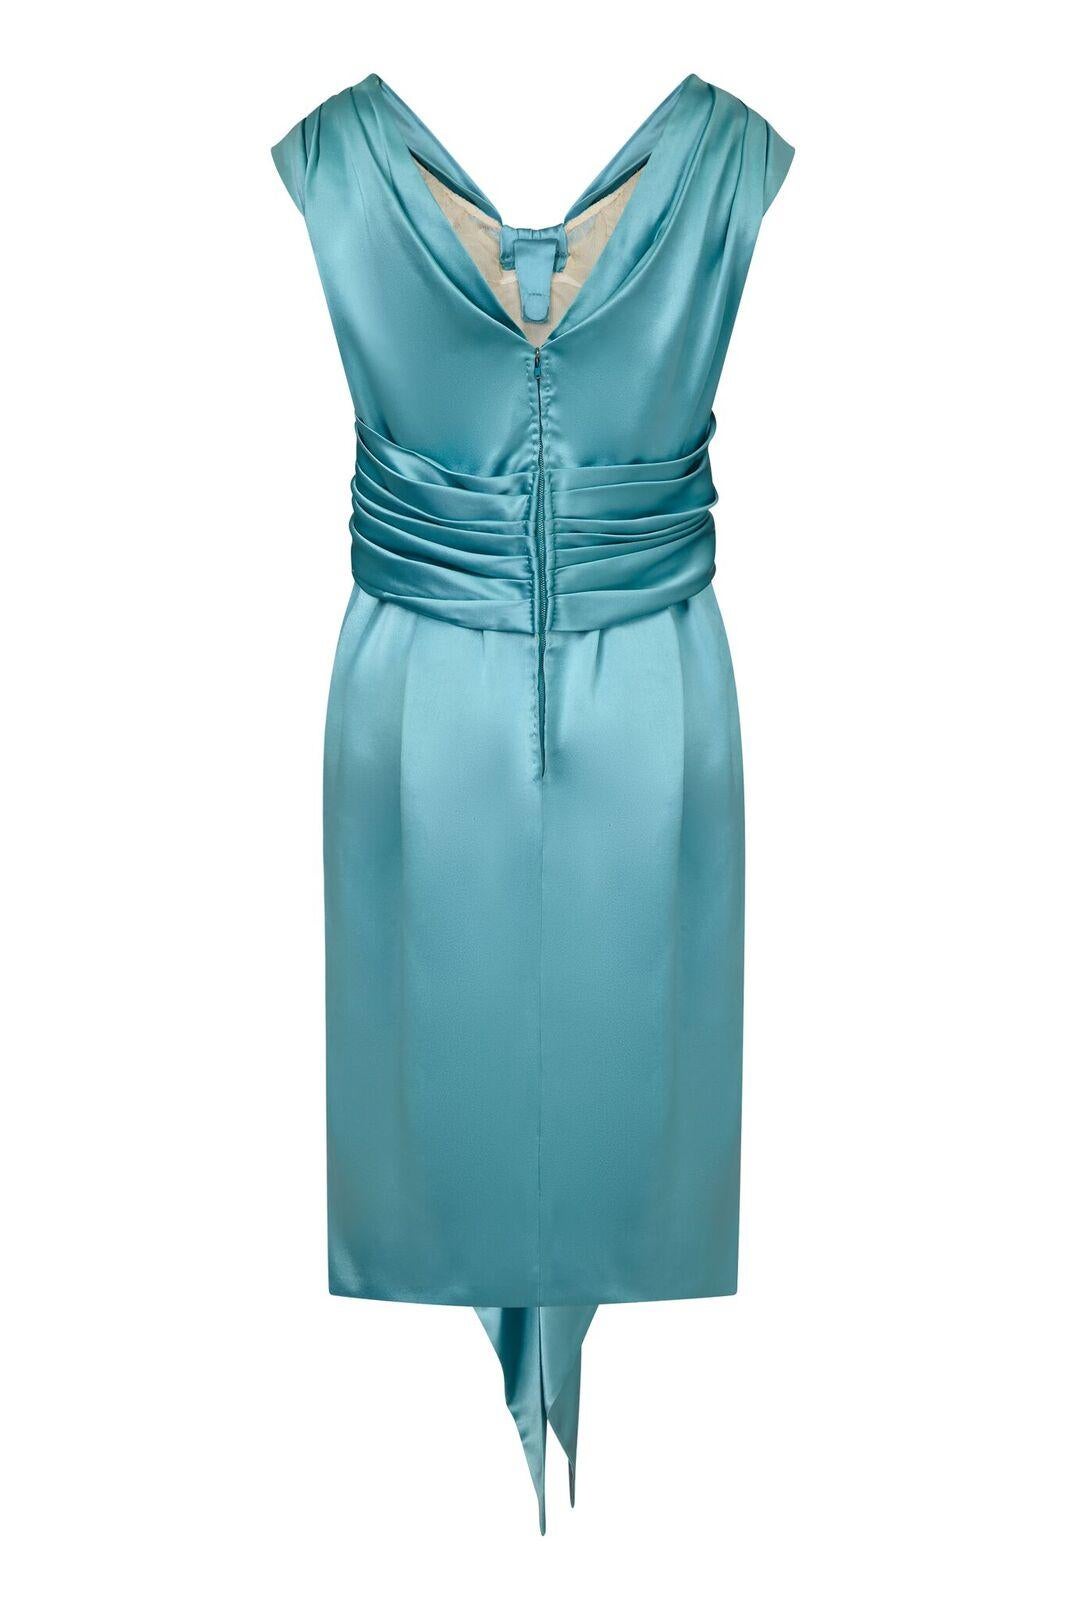 This incredible 1950s Hardy Amis couture label rich silk satin occasion dress in pale aquamarine perfectly showcases the skill and refinement for which its designer is extolled. Celebrated for opulent occasion wear in structured silks, Amis was a